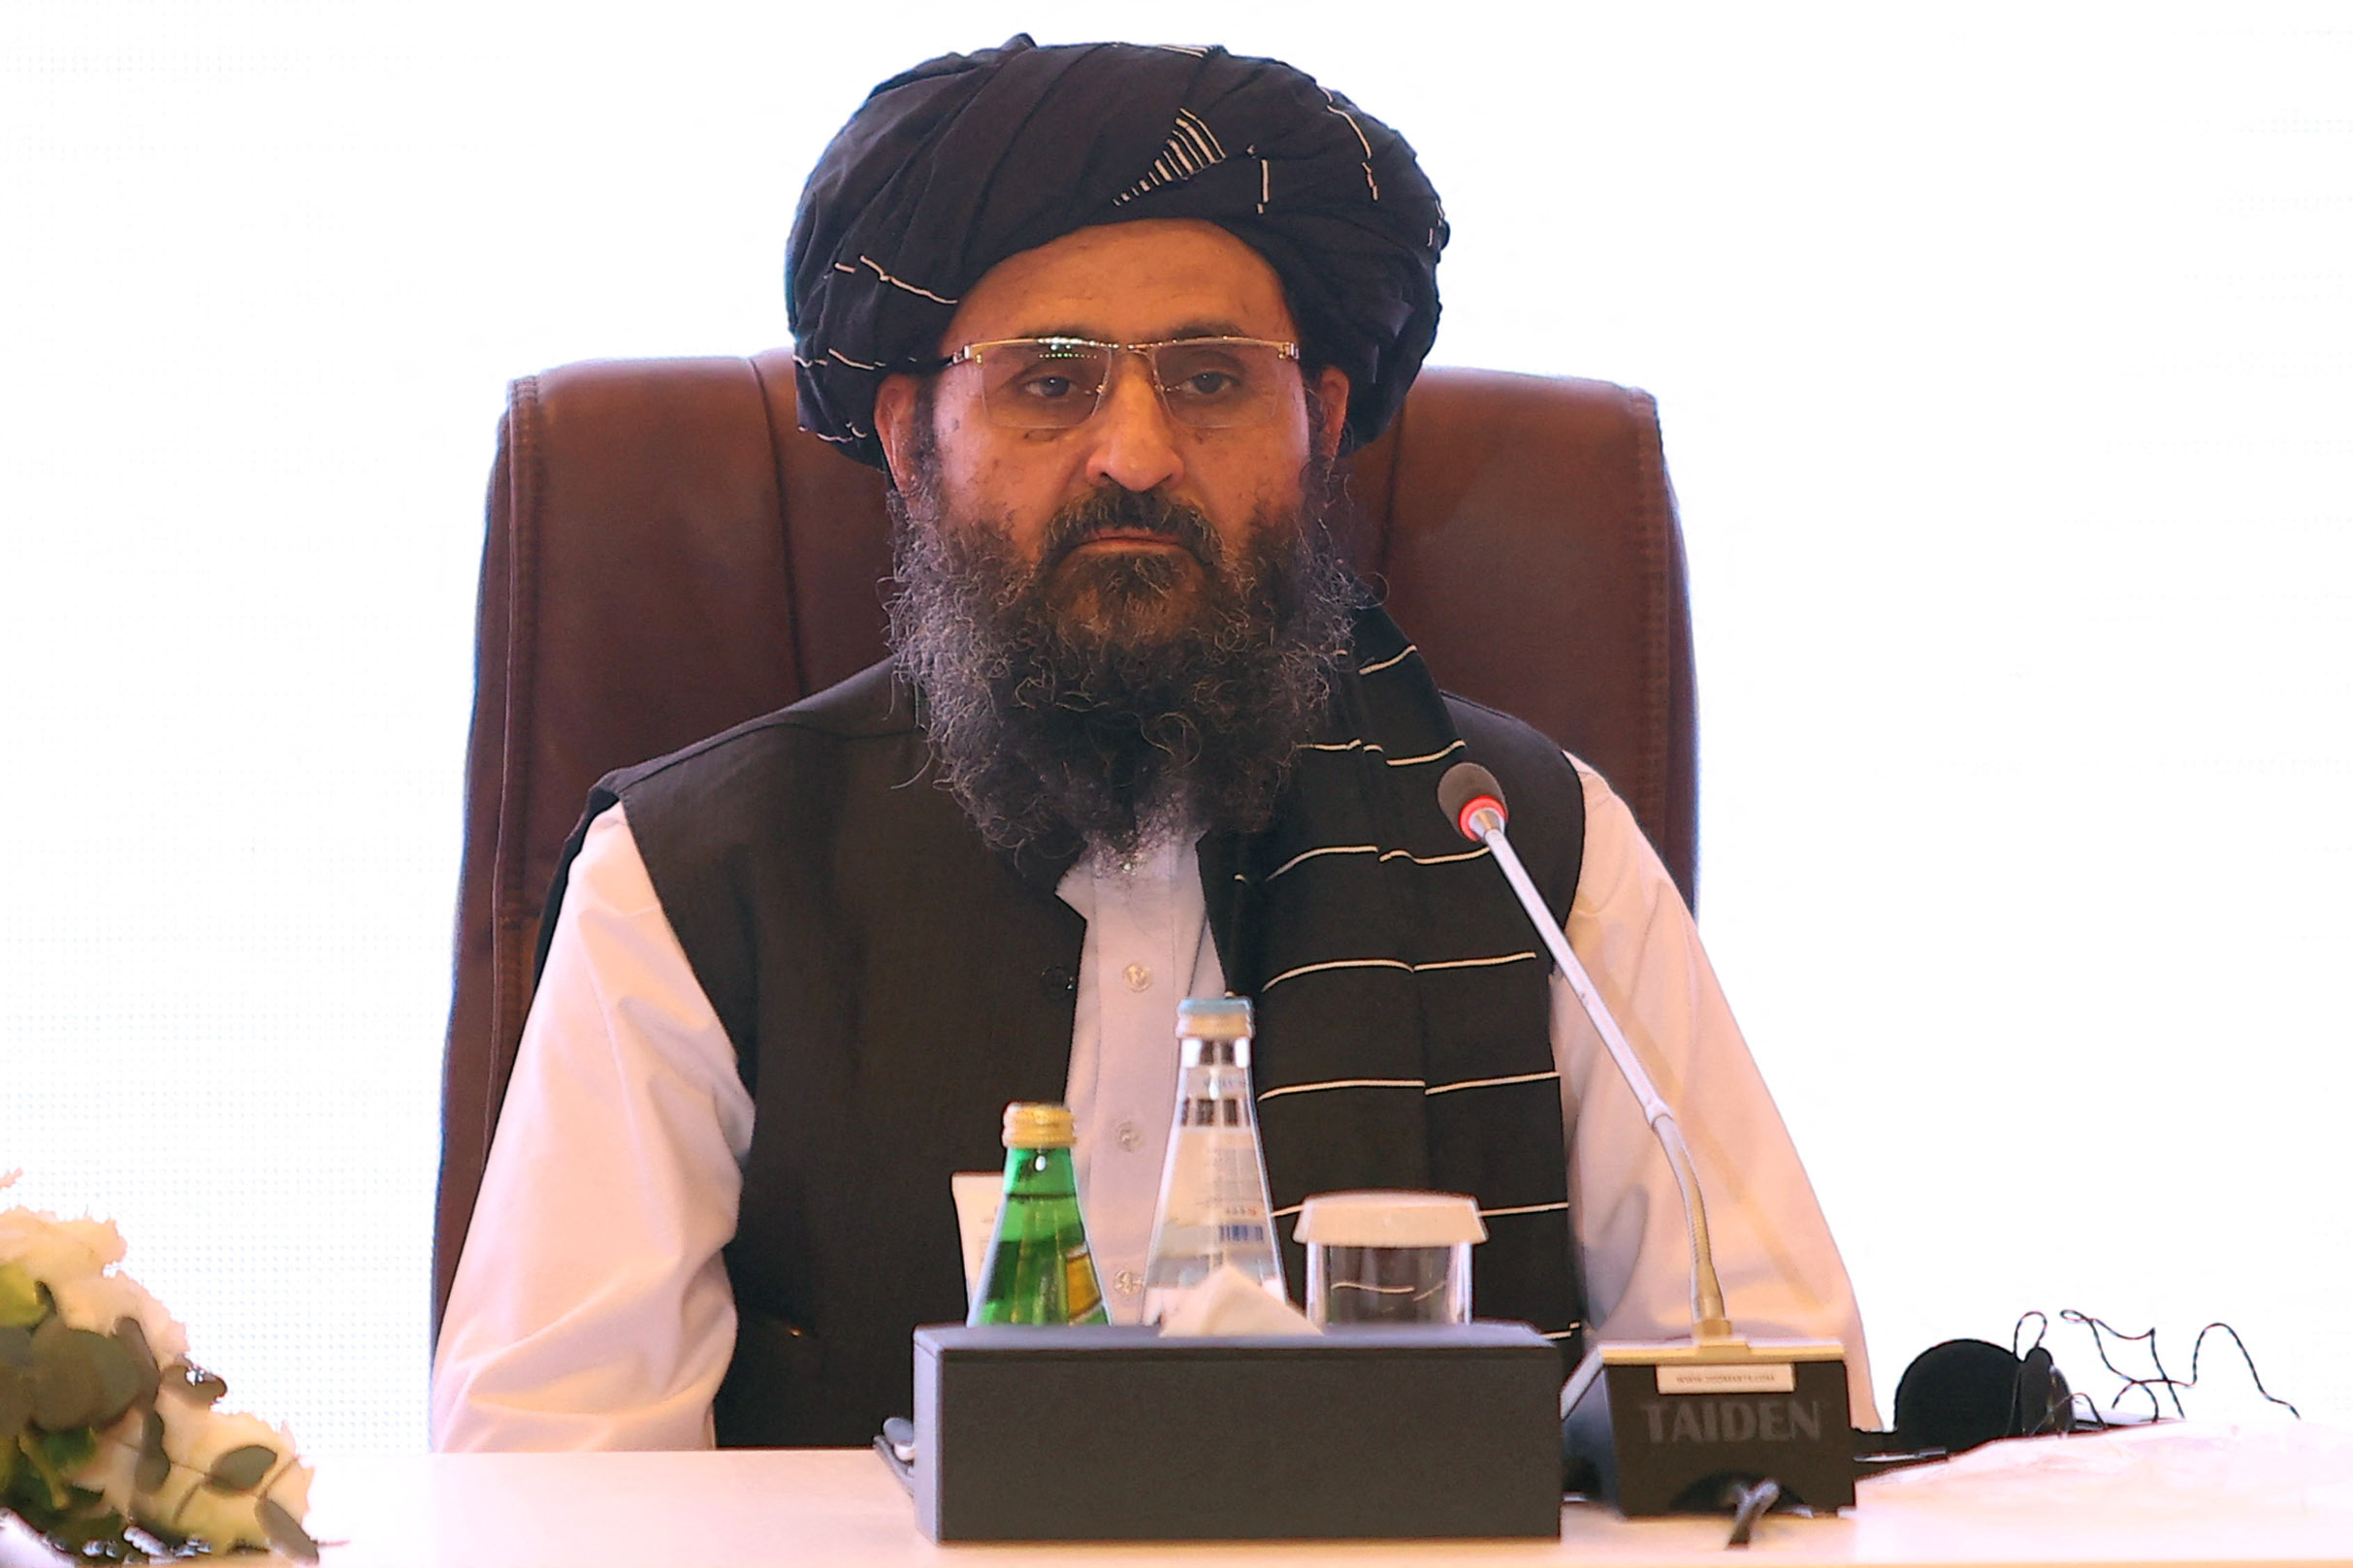 The leader of the Taliban negotiating team Mullah Abdul Ghani Baradar looks on during the final declaration of the peace talks between the Afghan government and the Taliban is presented in Qatar's capital Doha on July 18, 2021. (Photo by KARIM JAAFAR/AFP via Getty Images)